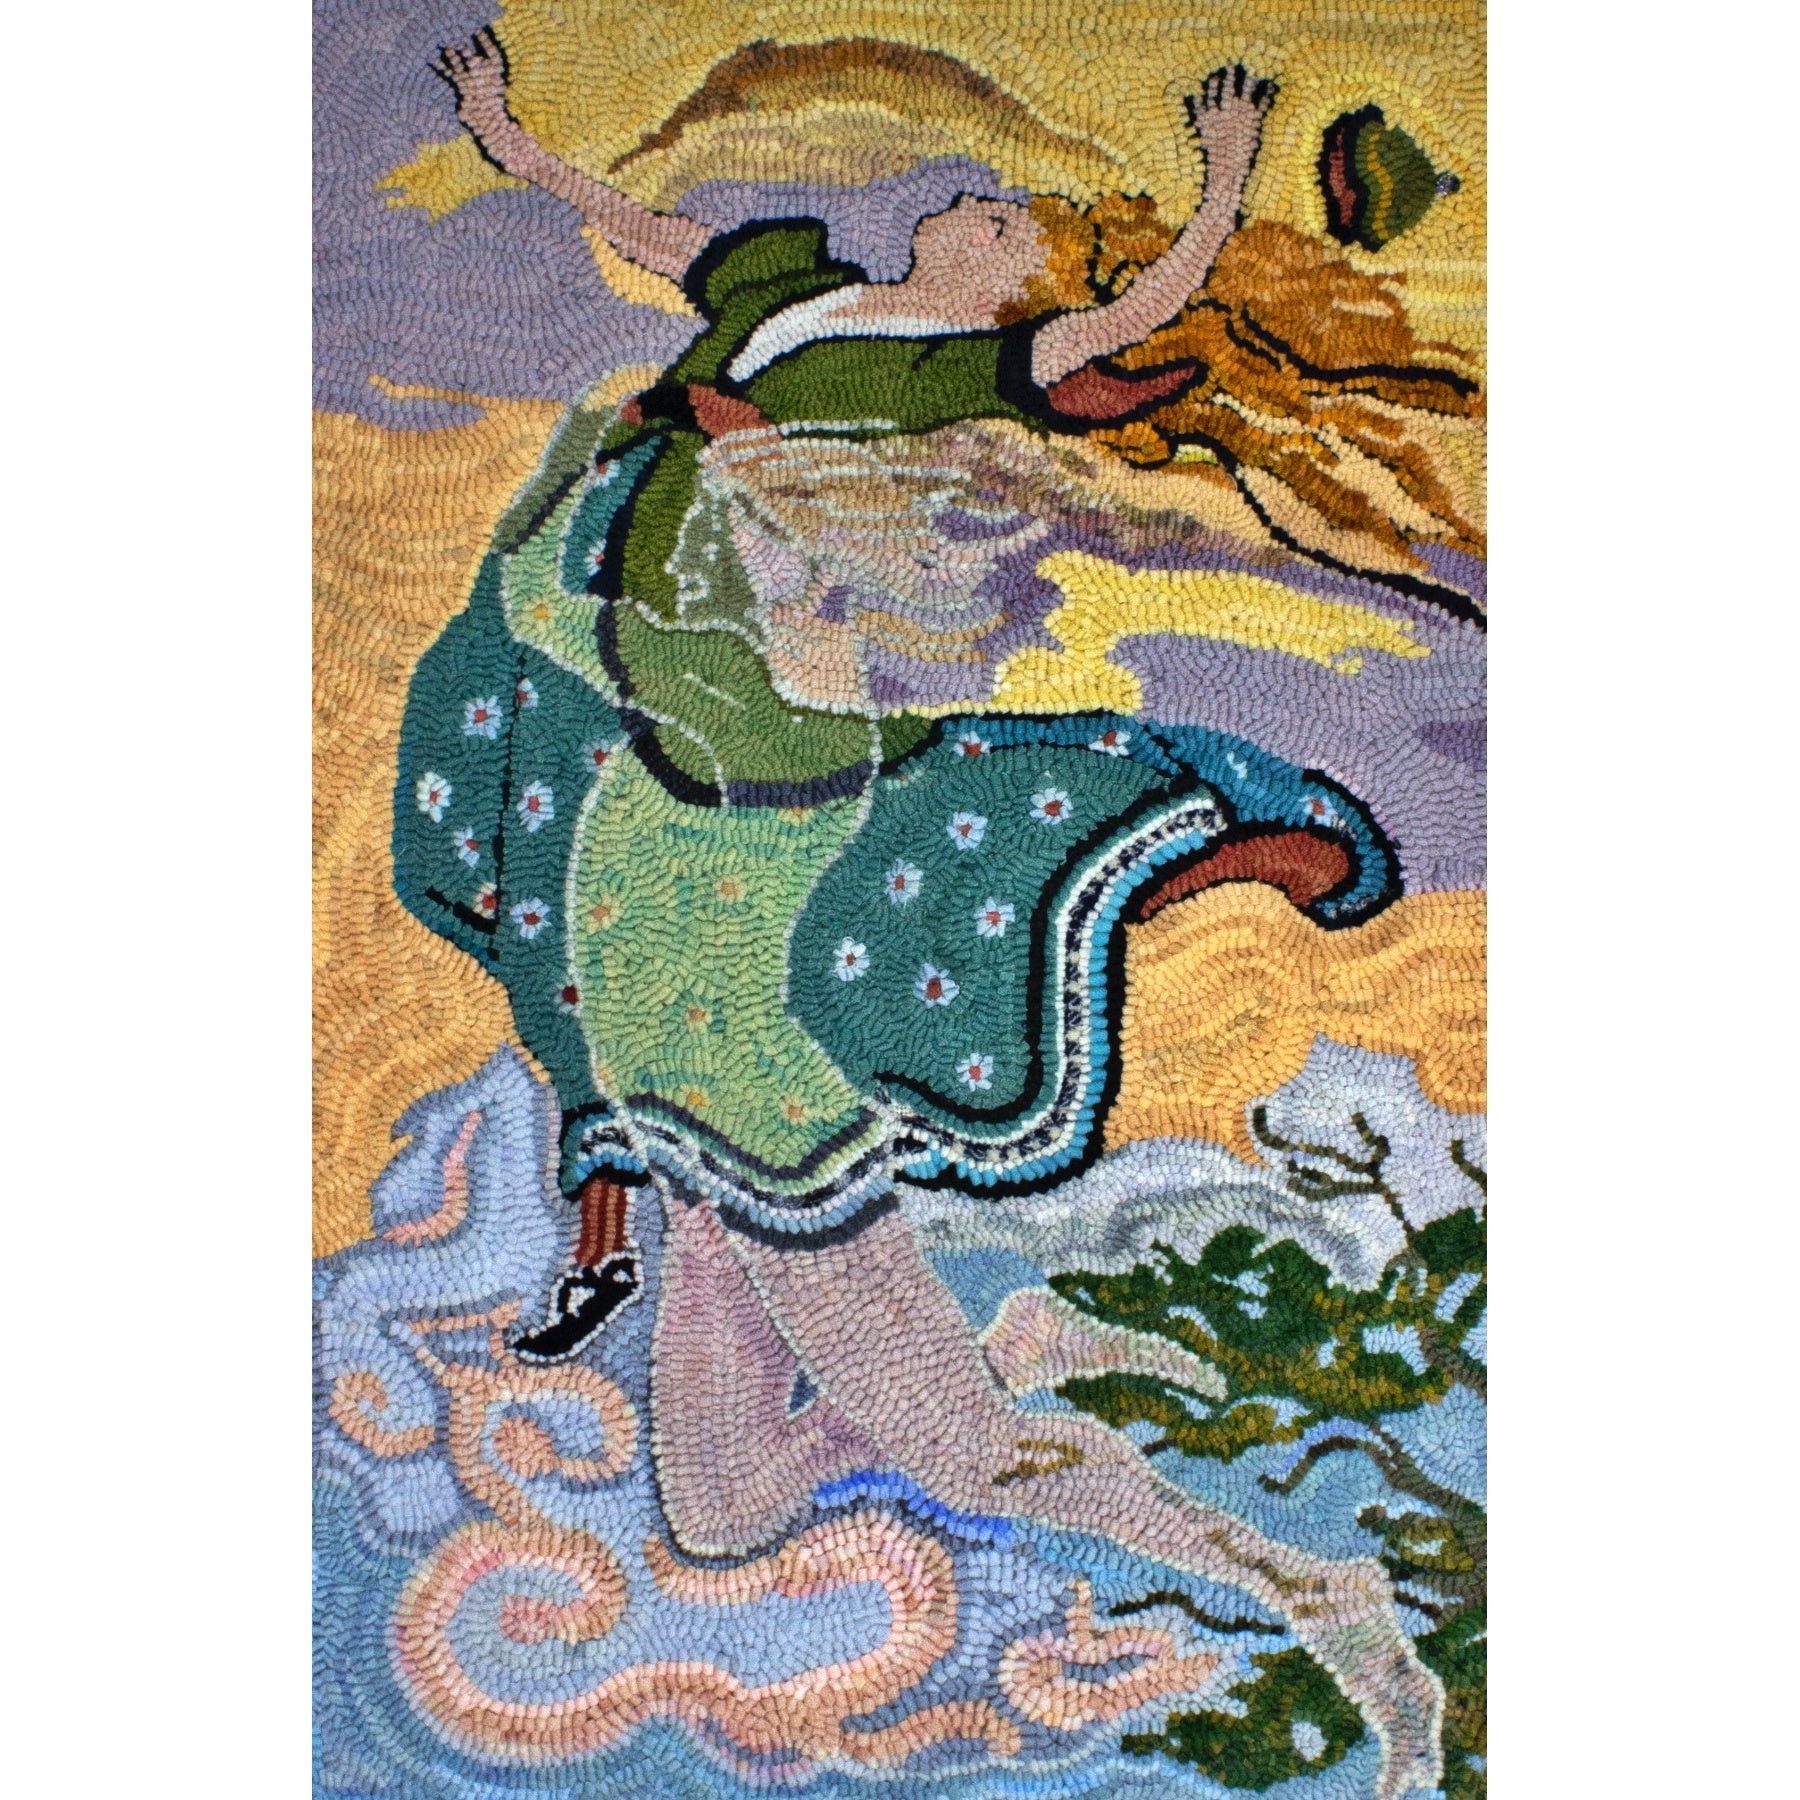 Whirlwind the Whistler Carries away Golden Tress, ill. Frank C Pape, 1916, rug hooked by Pam Finnegan